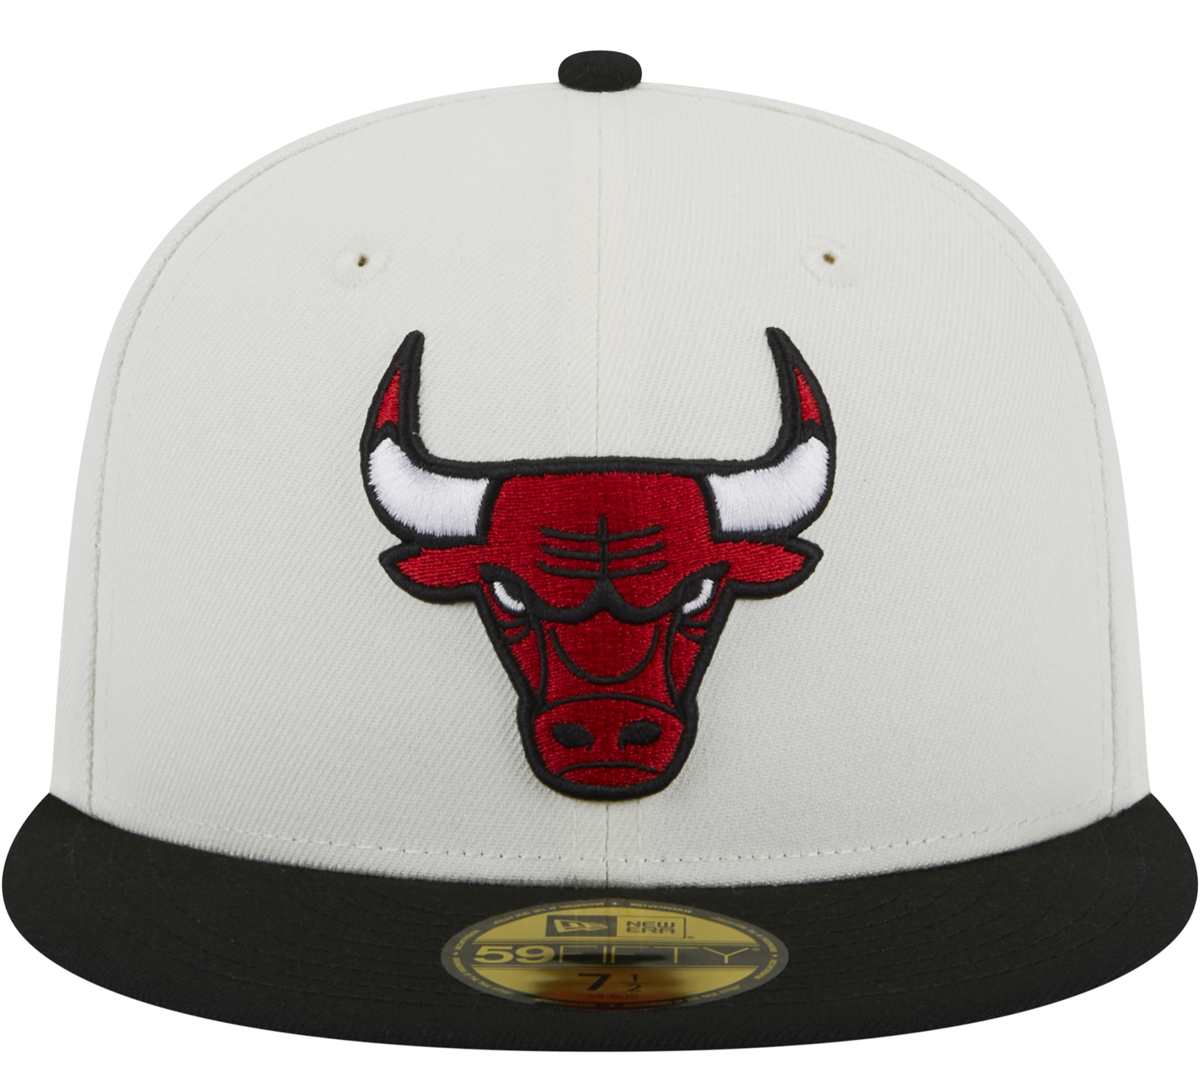 Air Jordan 3 White Cement Reimagined Bulls Fitted Hat